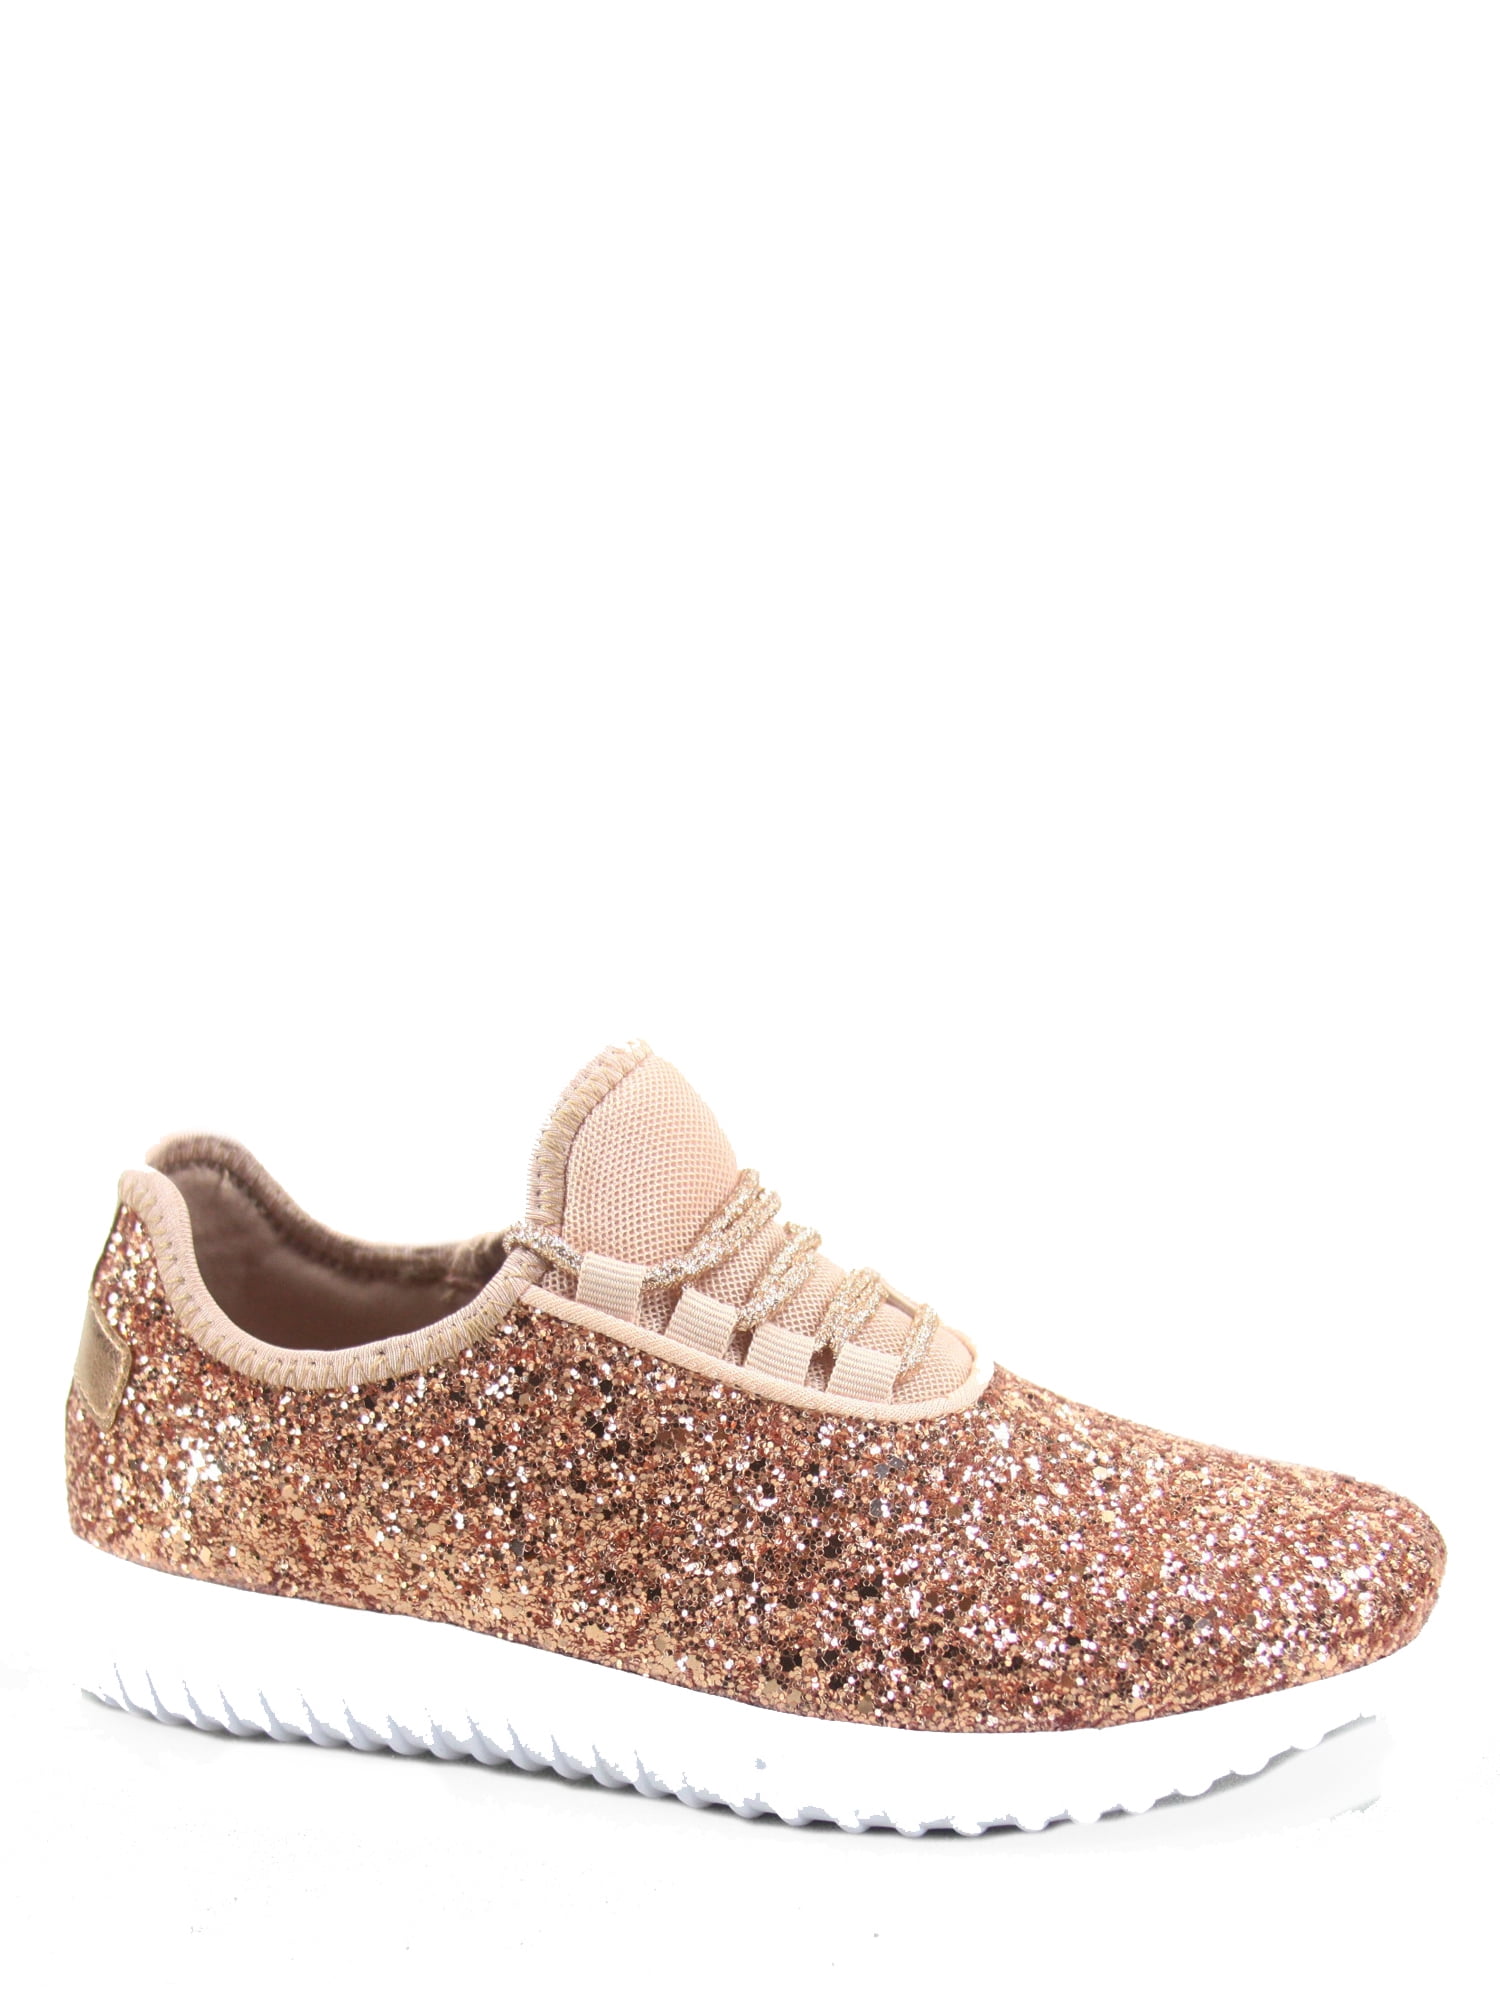 TRUSSARDI JEANS | Rose gold Women's Laced Shoes | YOOX